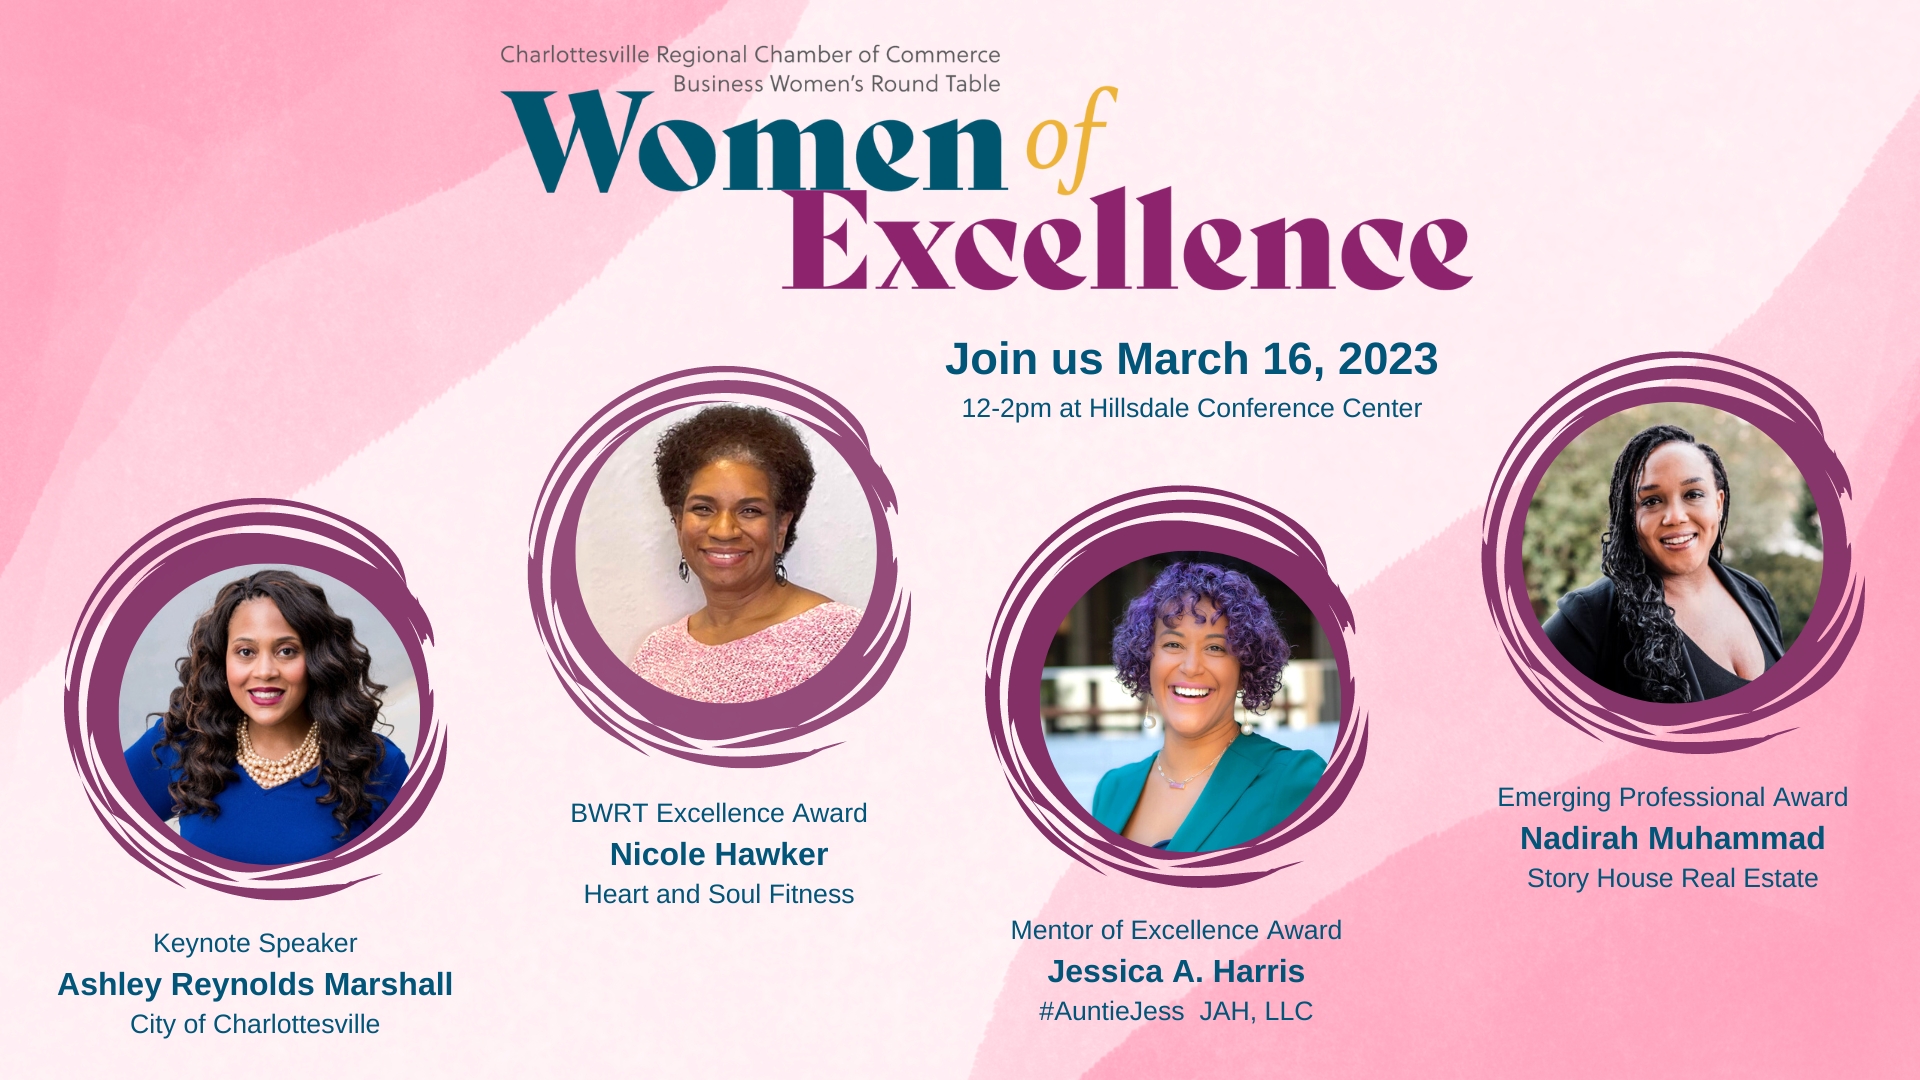 Join us March 16 for the BWRT Women of Excellence Luncheon